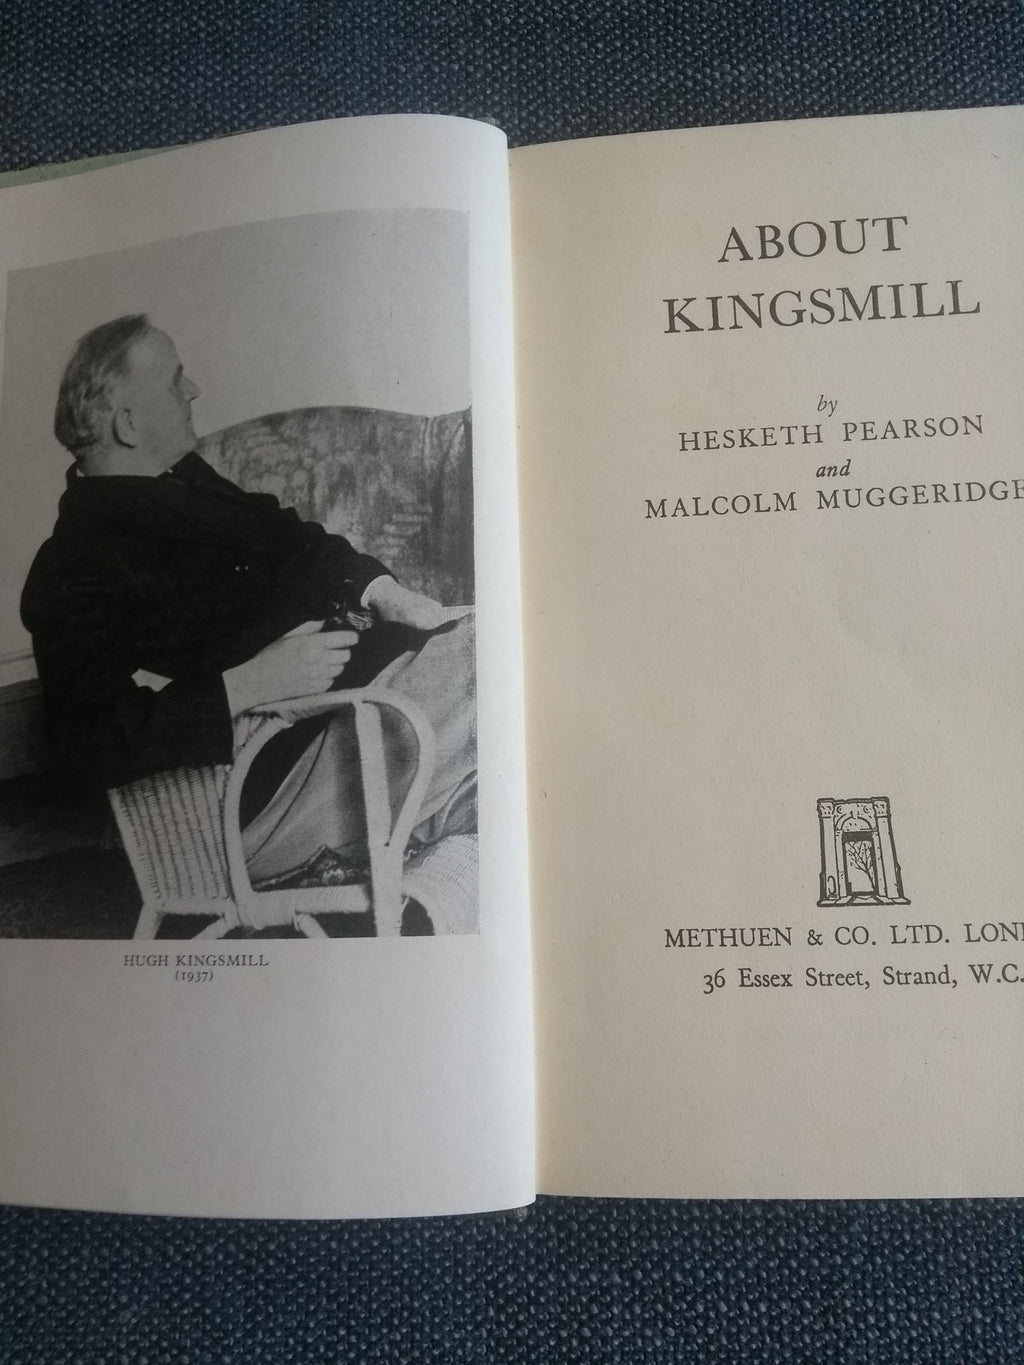 About Kingsmill, by Hesketh Pearson and Malcolm Muggeridge